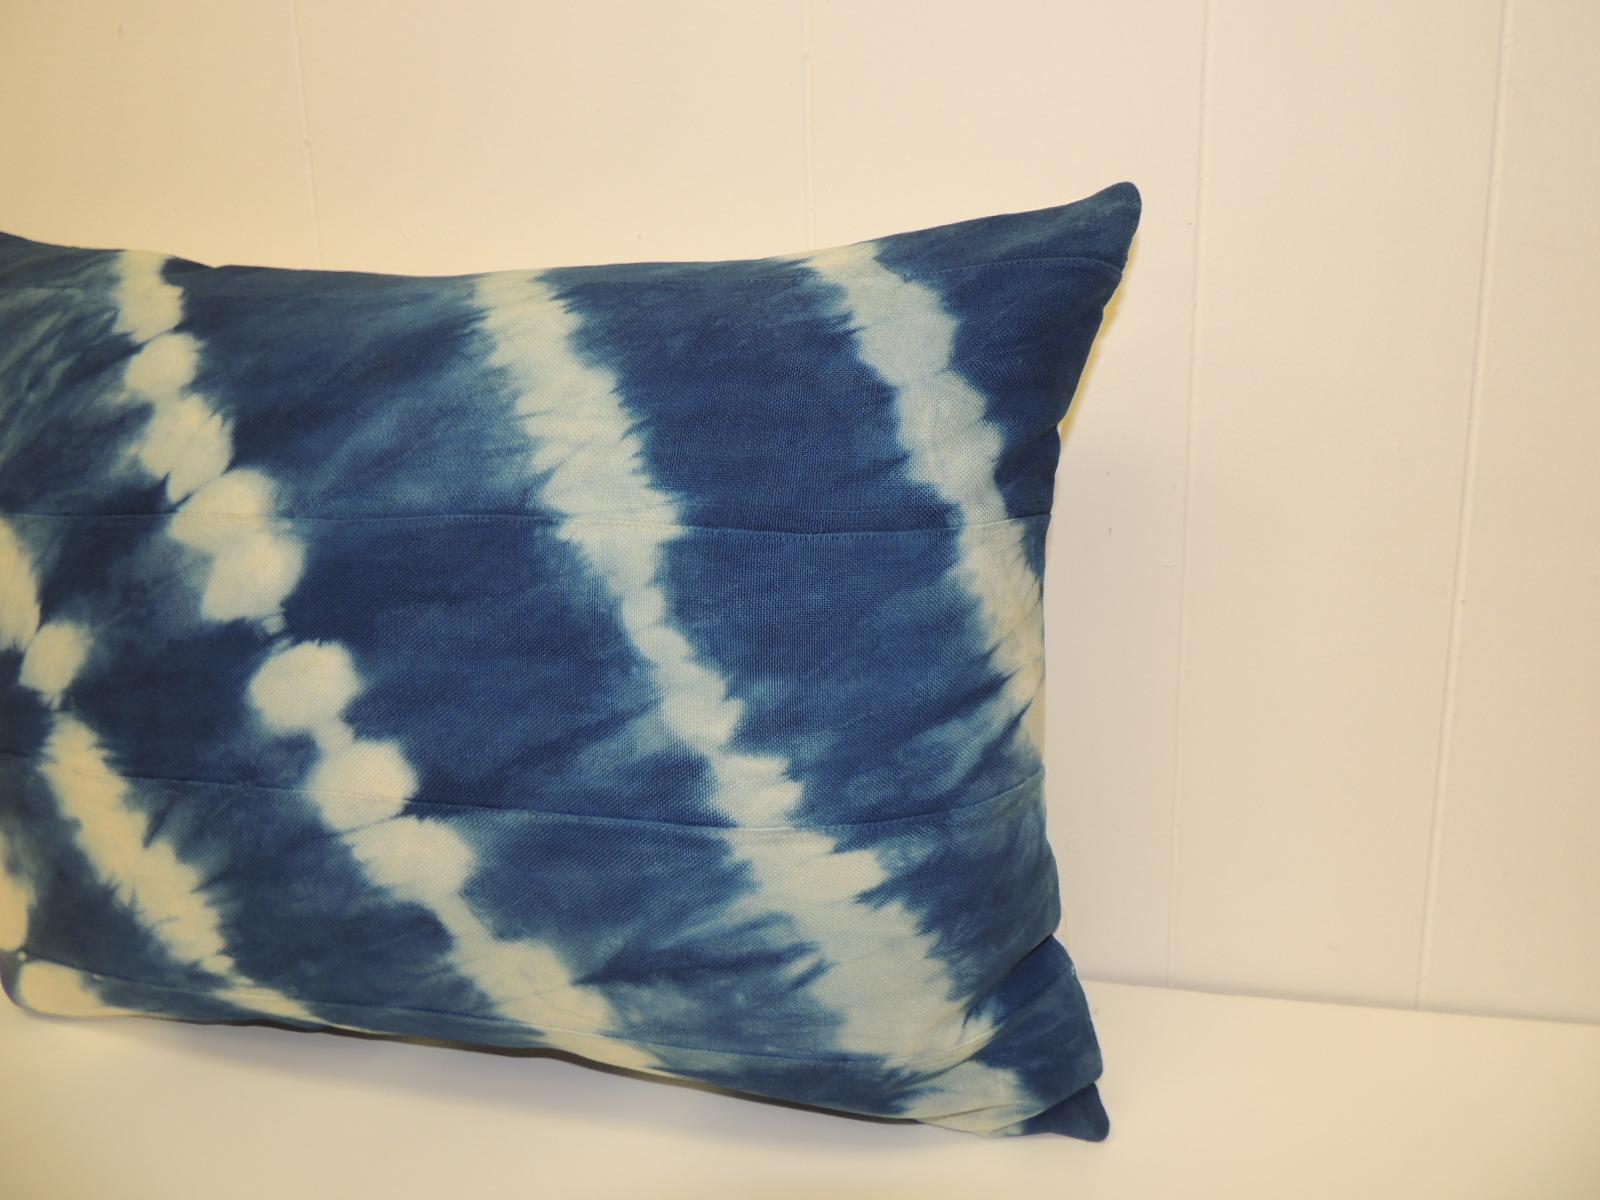 Vintage Indigo and White African Resist-dye Textile Decorative Pillow
Sunburst pattern square pillow with textured white silk backing.
Decorative pillow handmade and designed in the USA. 
Closure by stitch (no zipper) with custom made feather/down